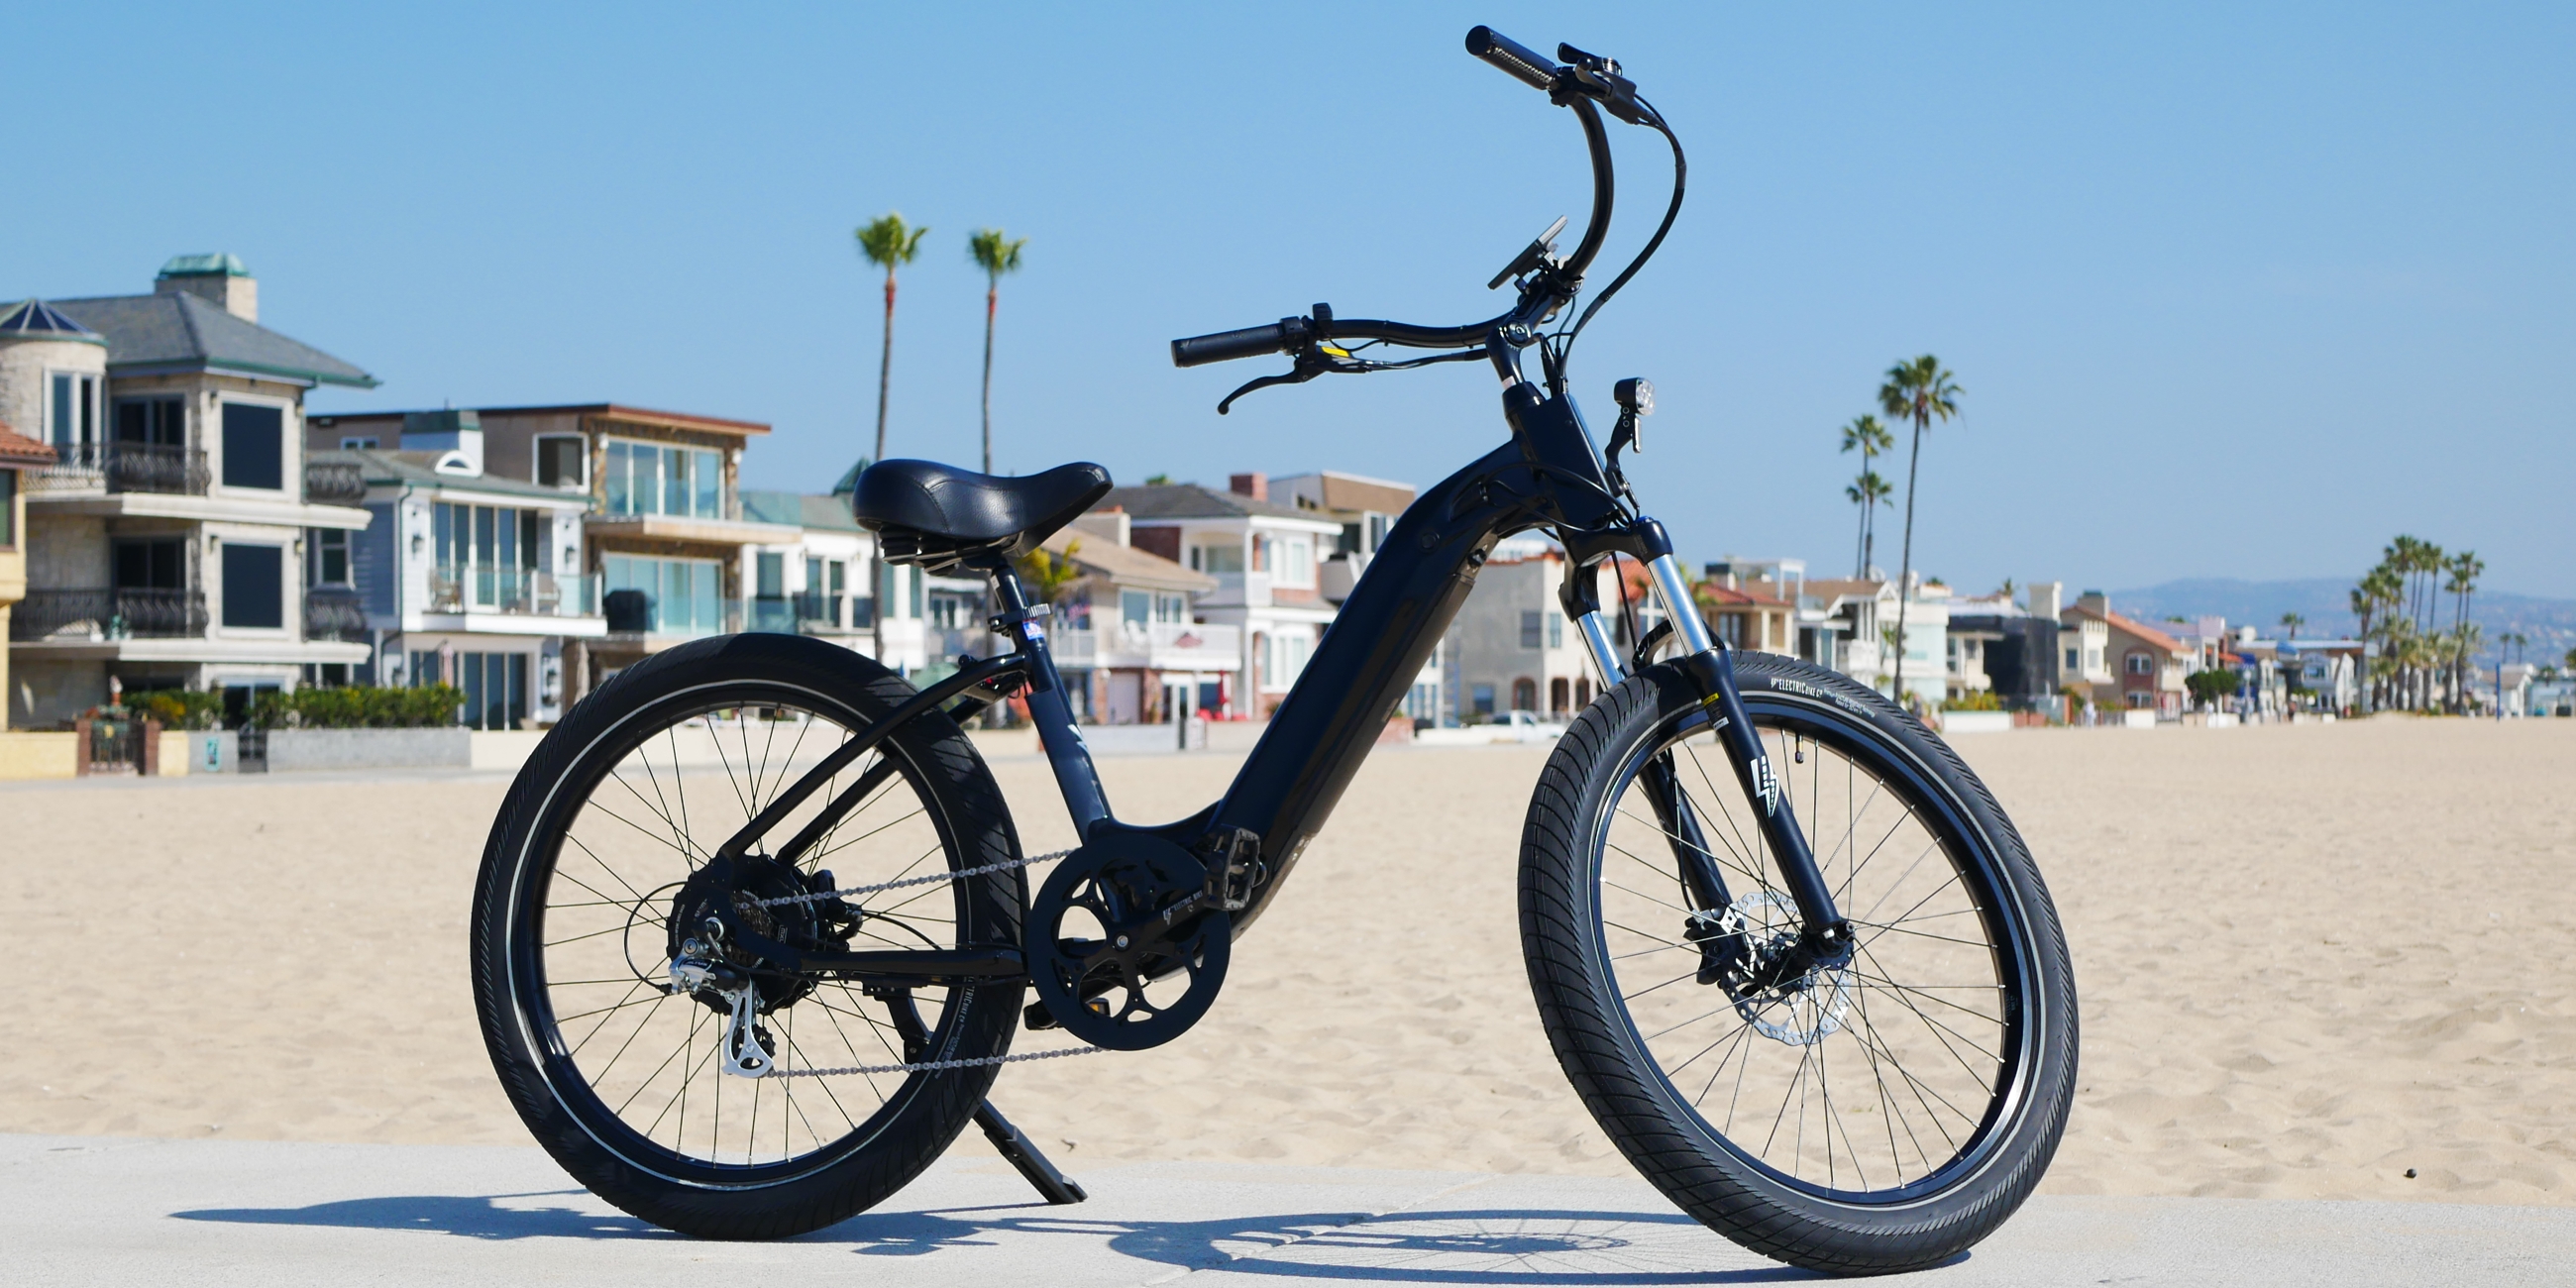 Model R electric bike is a madeinAmerica cruiser for the beach or city